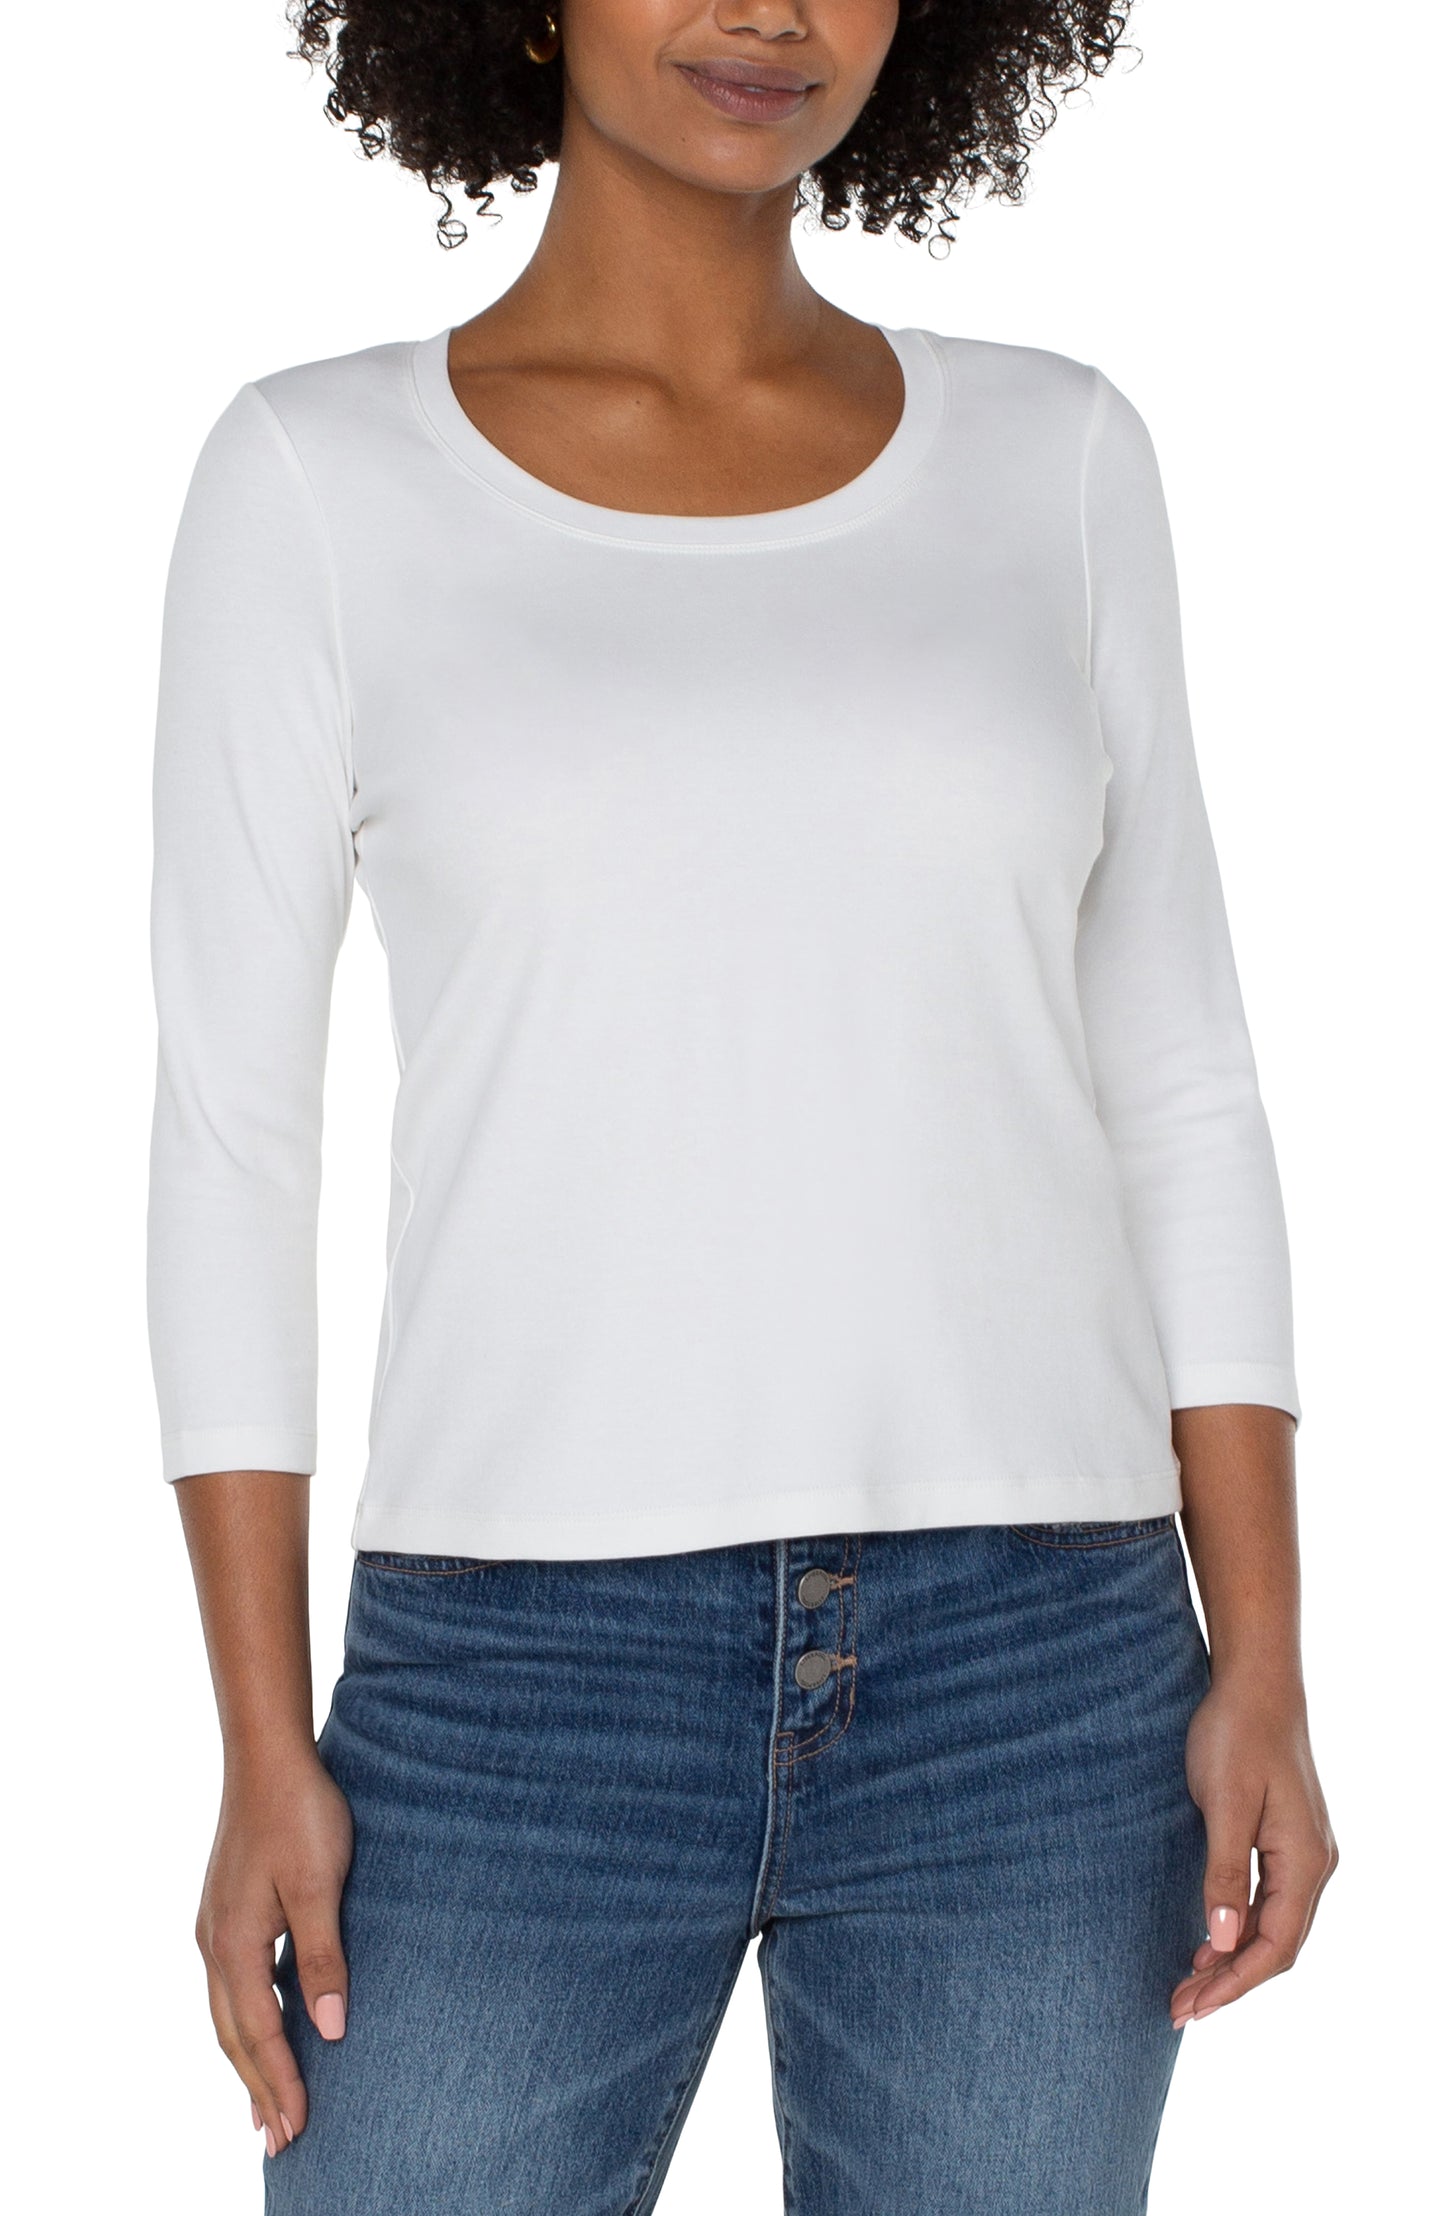 LIVERPOOL 3/4 SLEEVE SCOOP NECK TOP - WHITE - LM8A00K99100